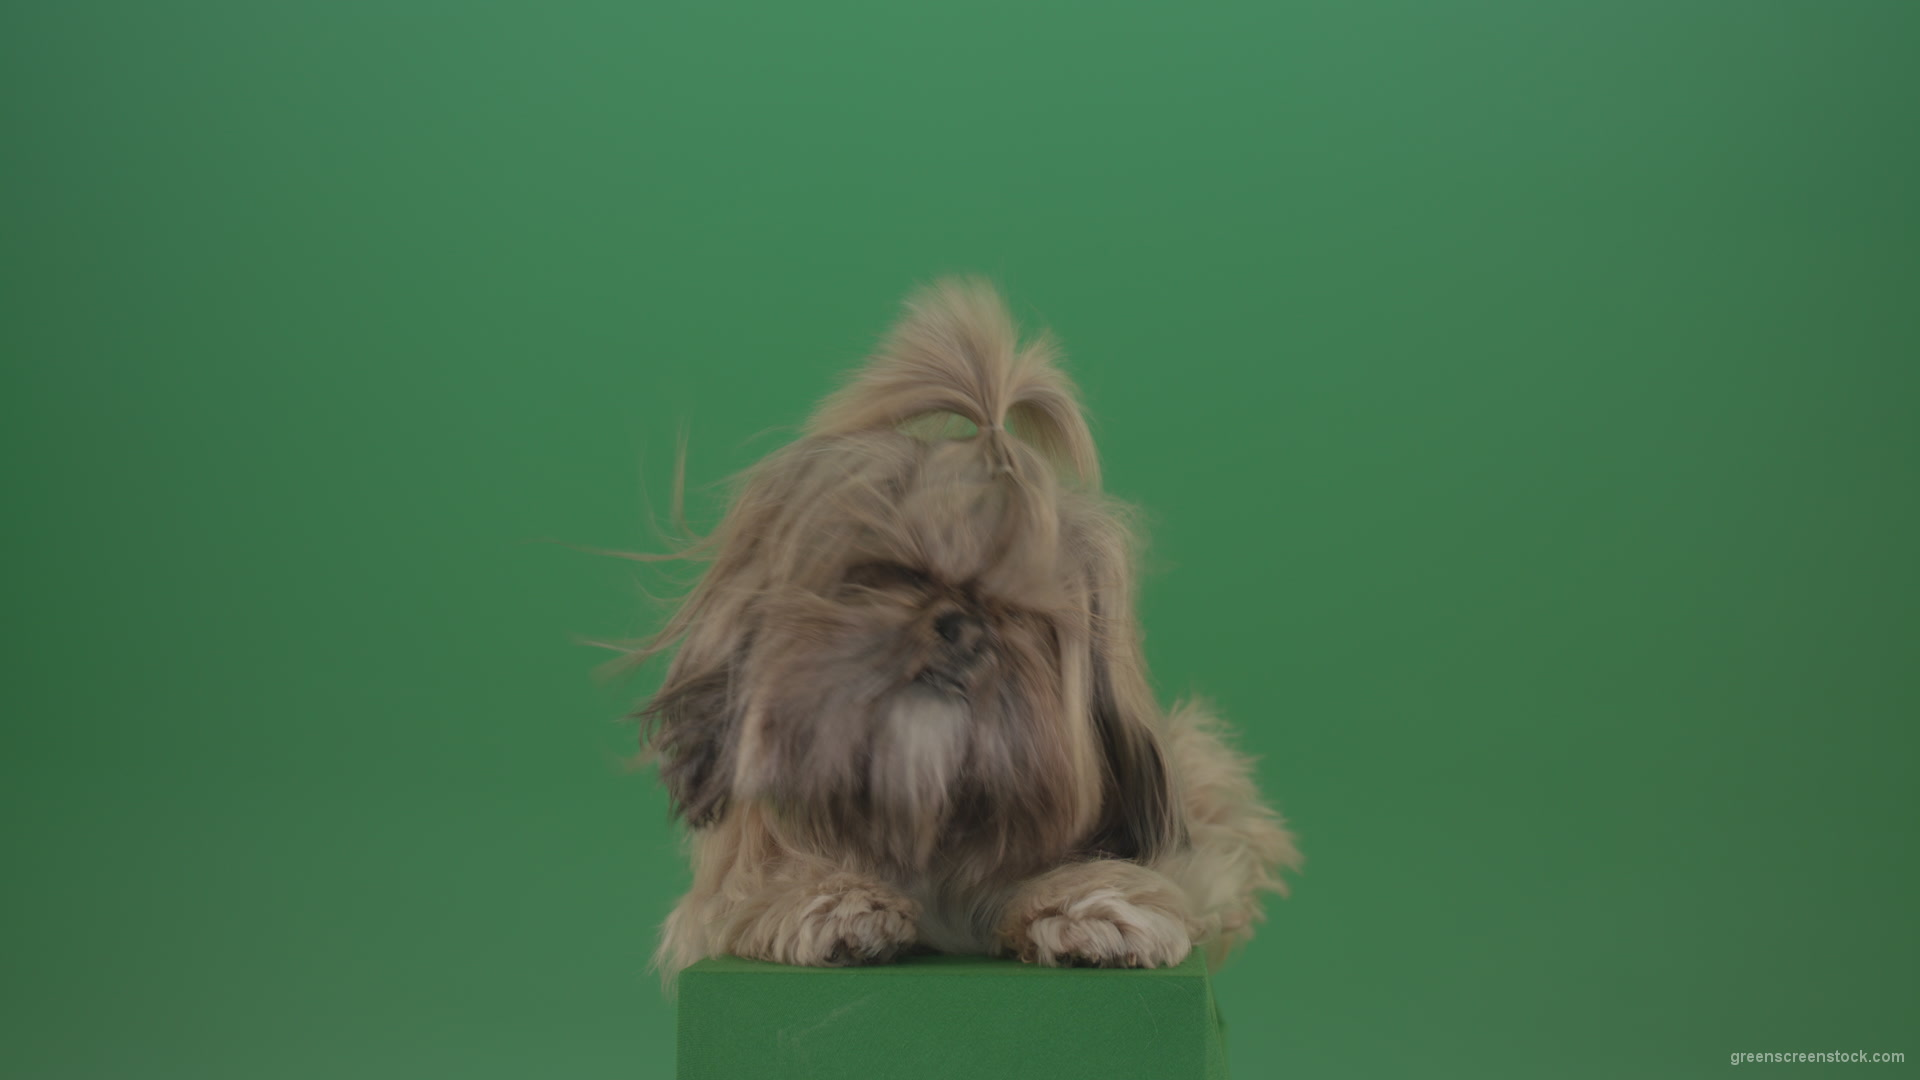 vj video background Shih-Tzu-Small-toy-dog-fashion-puppy-dont-like-the-wind-long-hair-dog-turbulence-isolated-on-green-screen_003